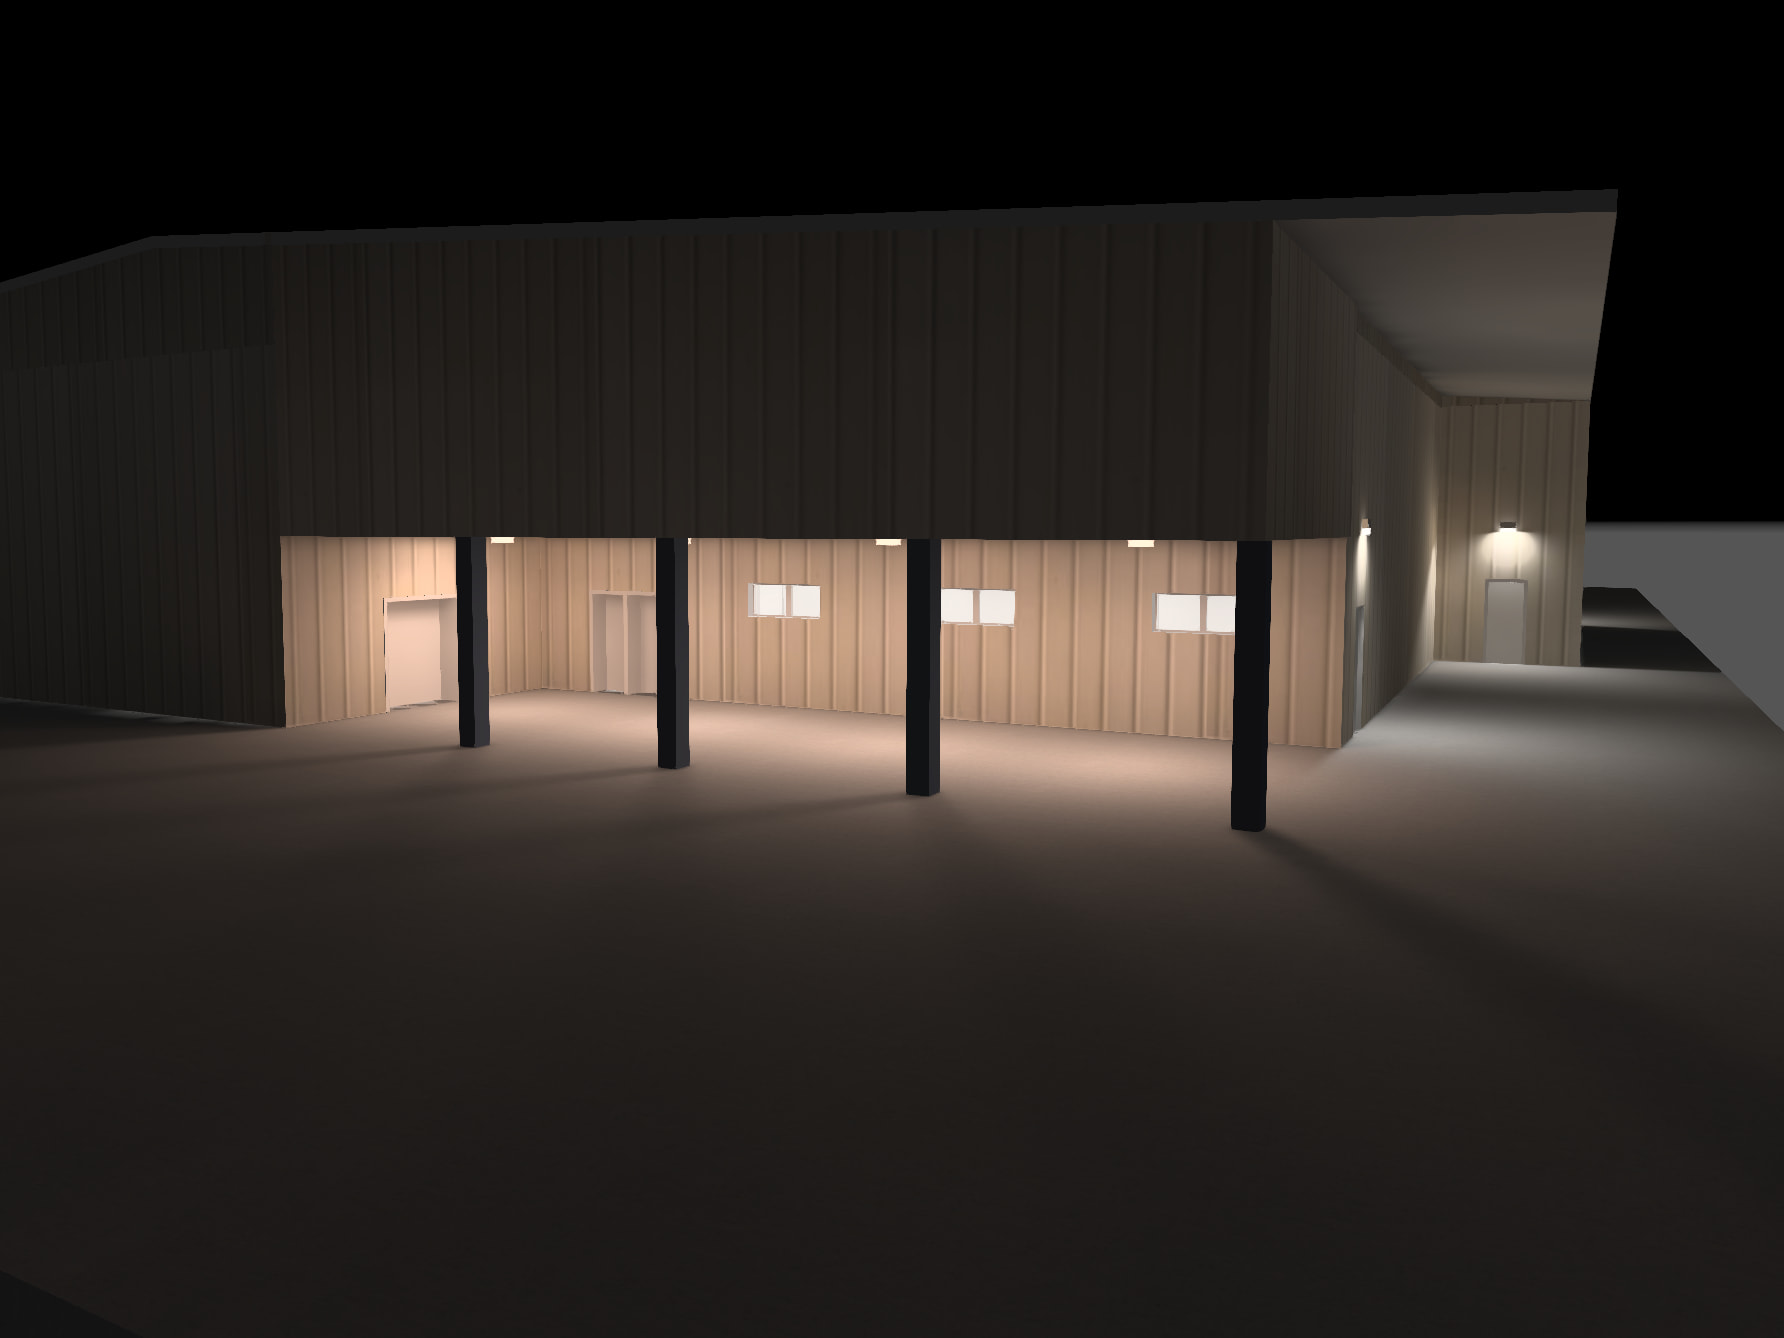 3D lighting design of 4 LED canopy lights illuminating a commercial patio